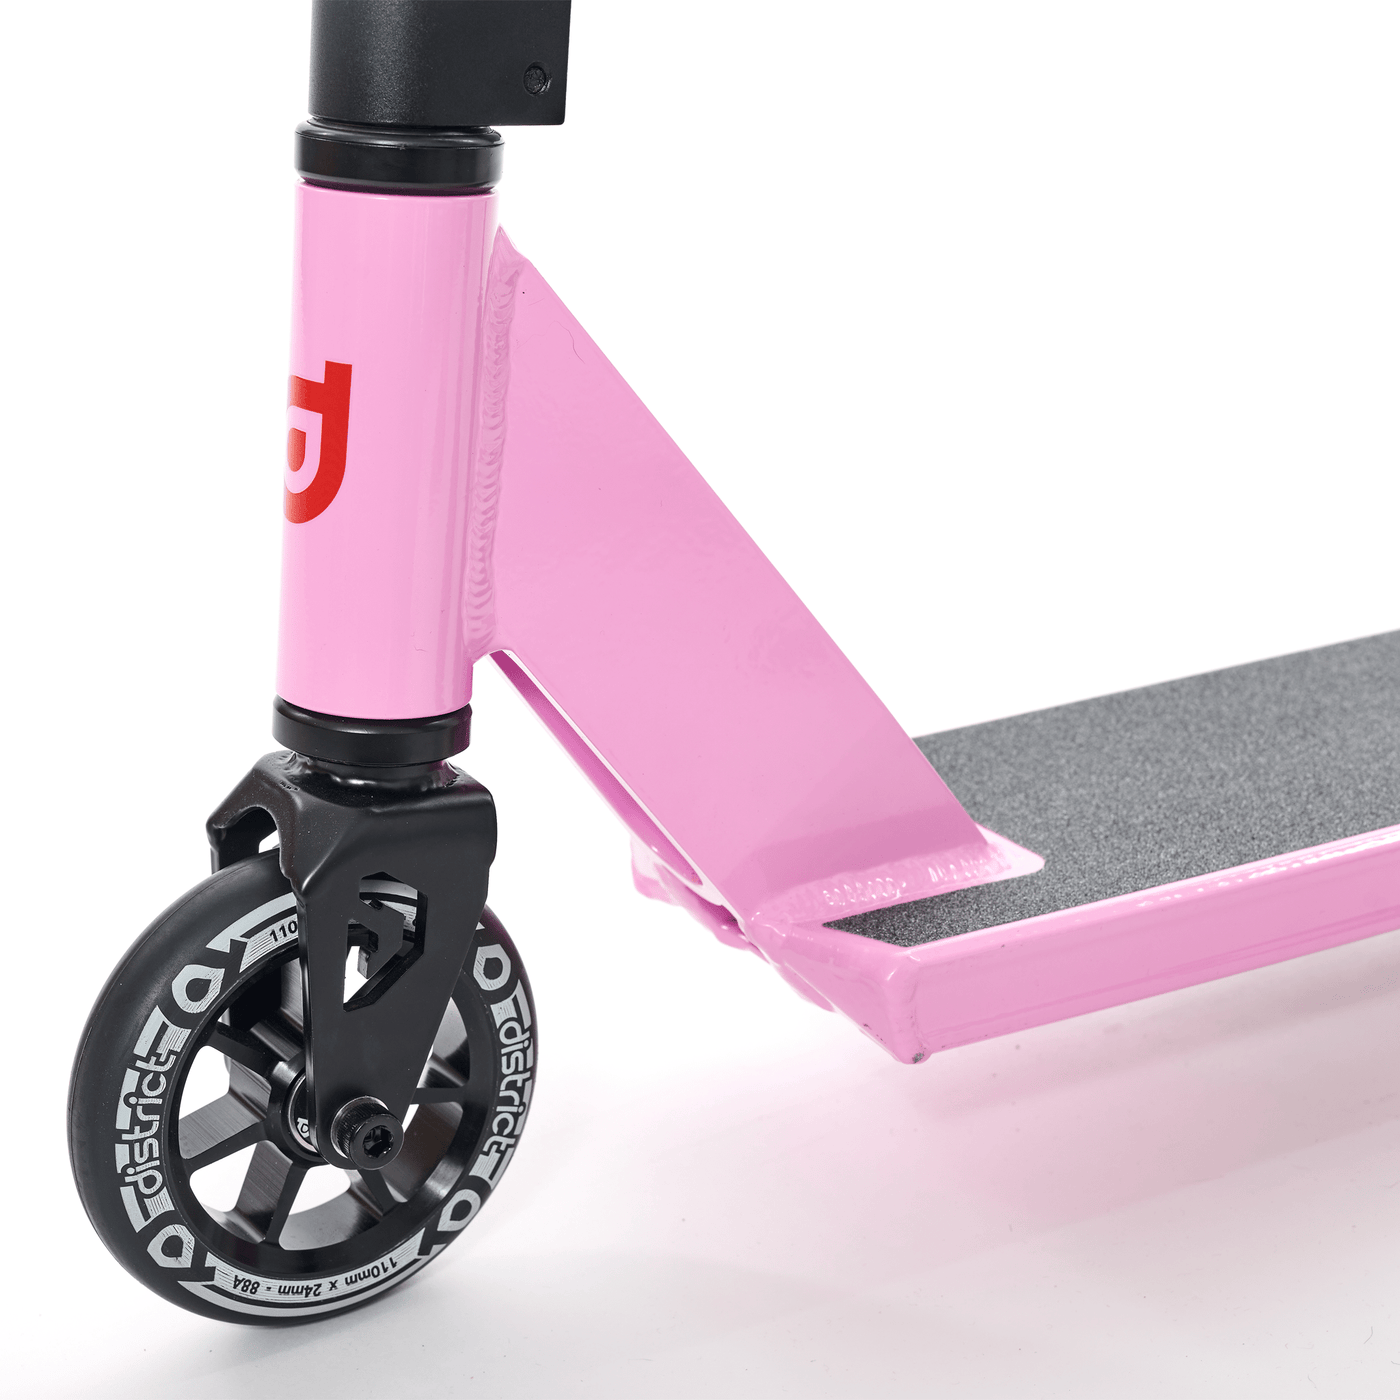 District Titus Complete Scooter - Pink / Black District